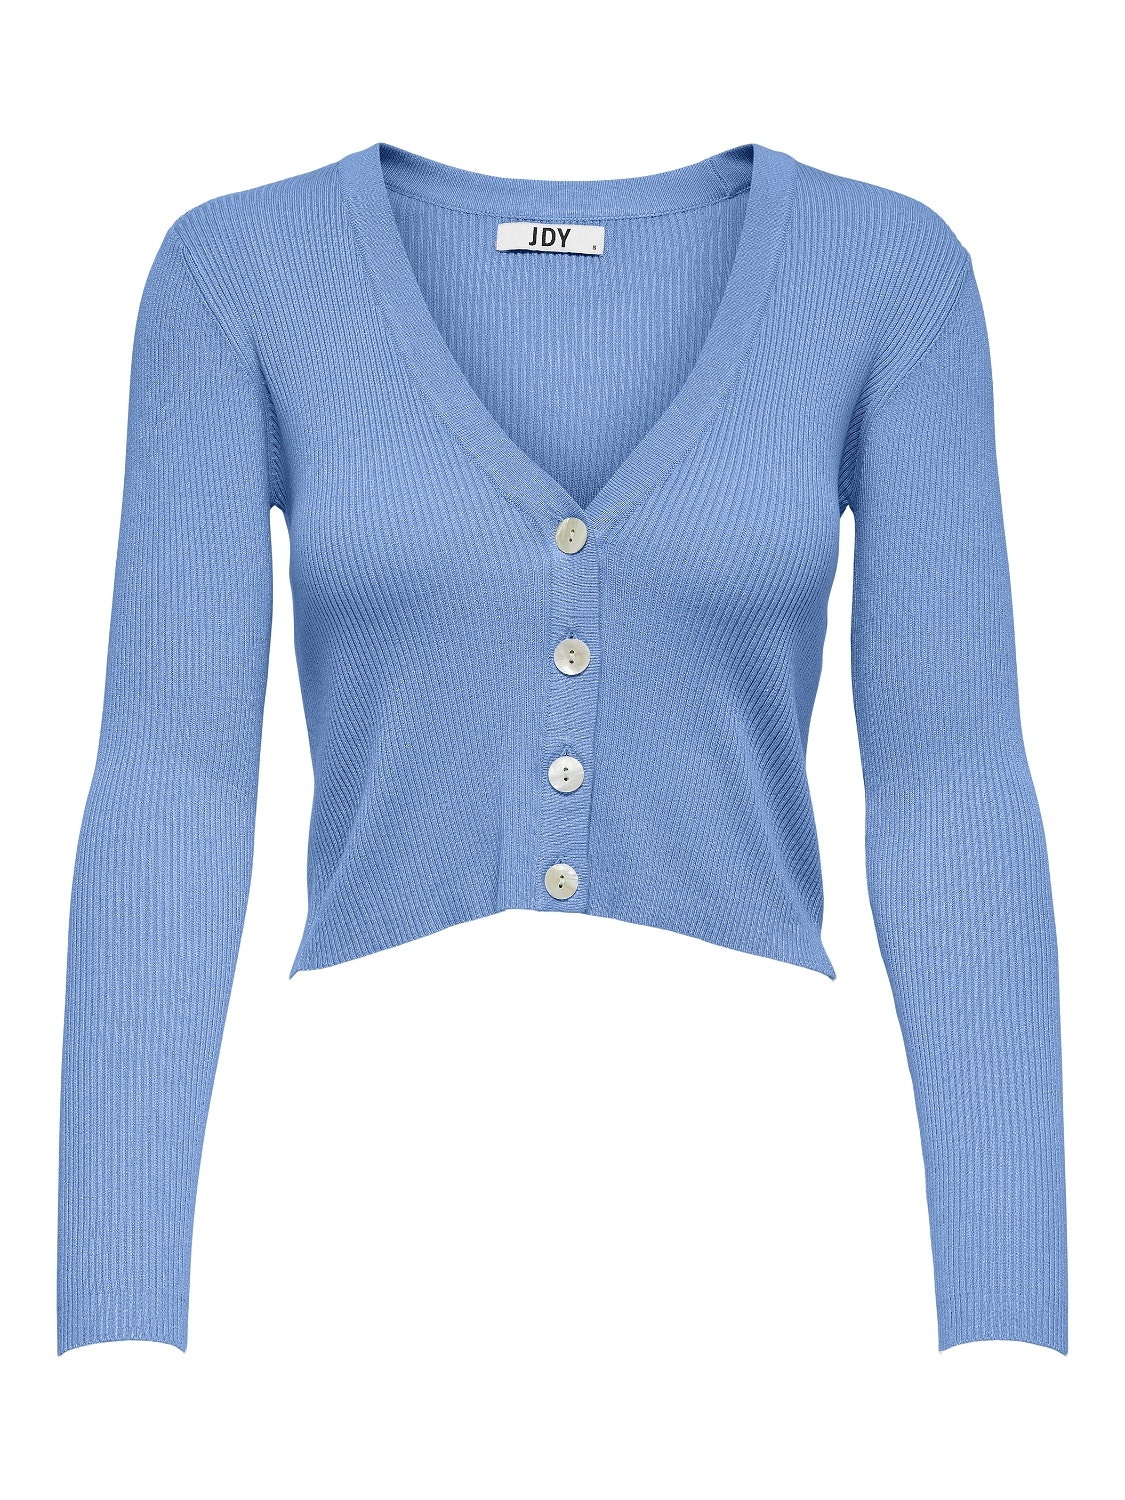 ONLY Short Knitted Cardigan -Little Boy Blue - 15171755